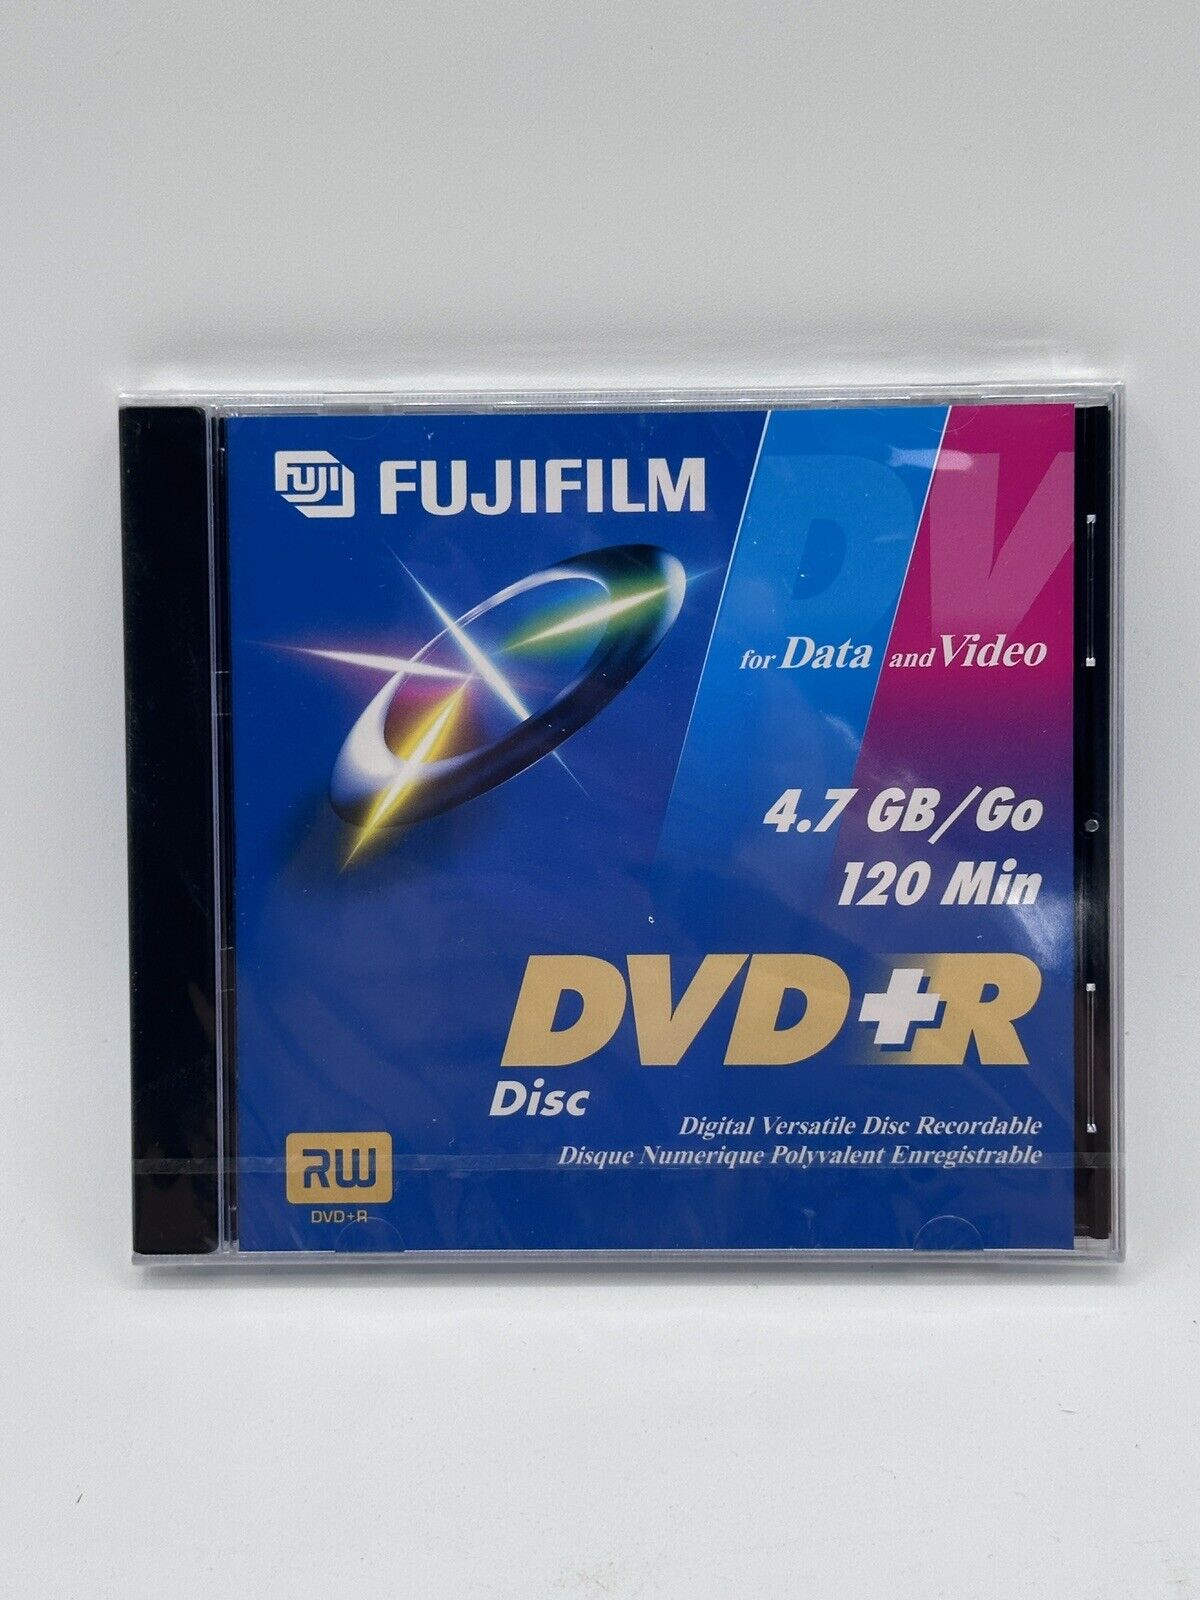 NEW Fuji DVD+R DVD 4.7Gb 120 Min DVD Disc Sealed for Data and Video